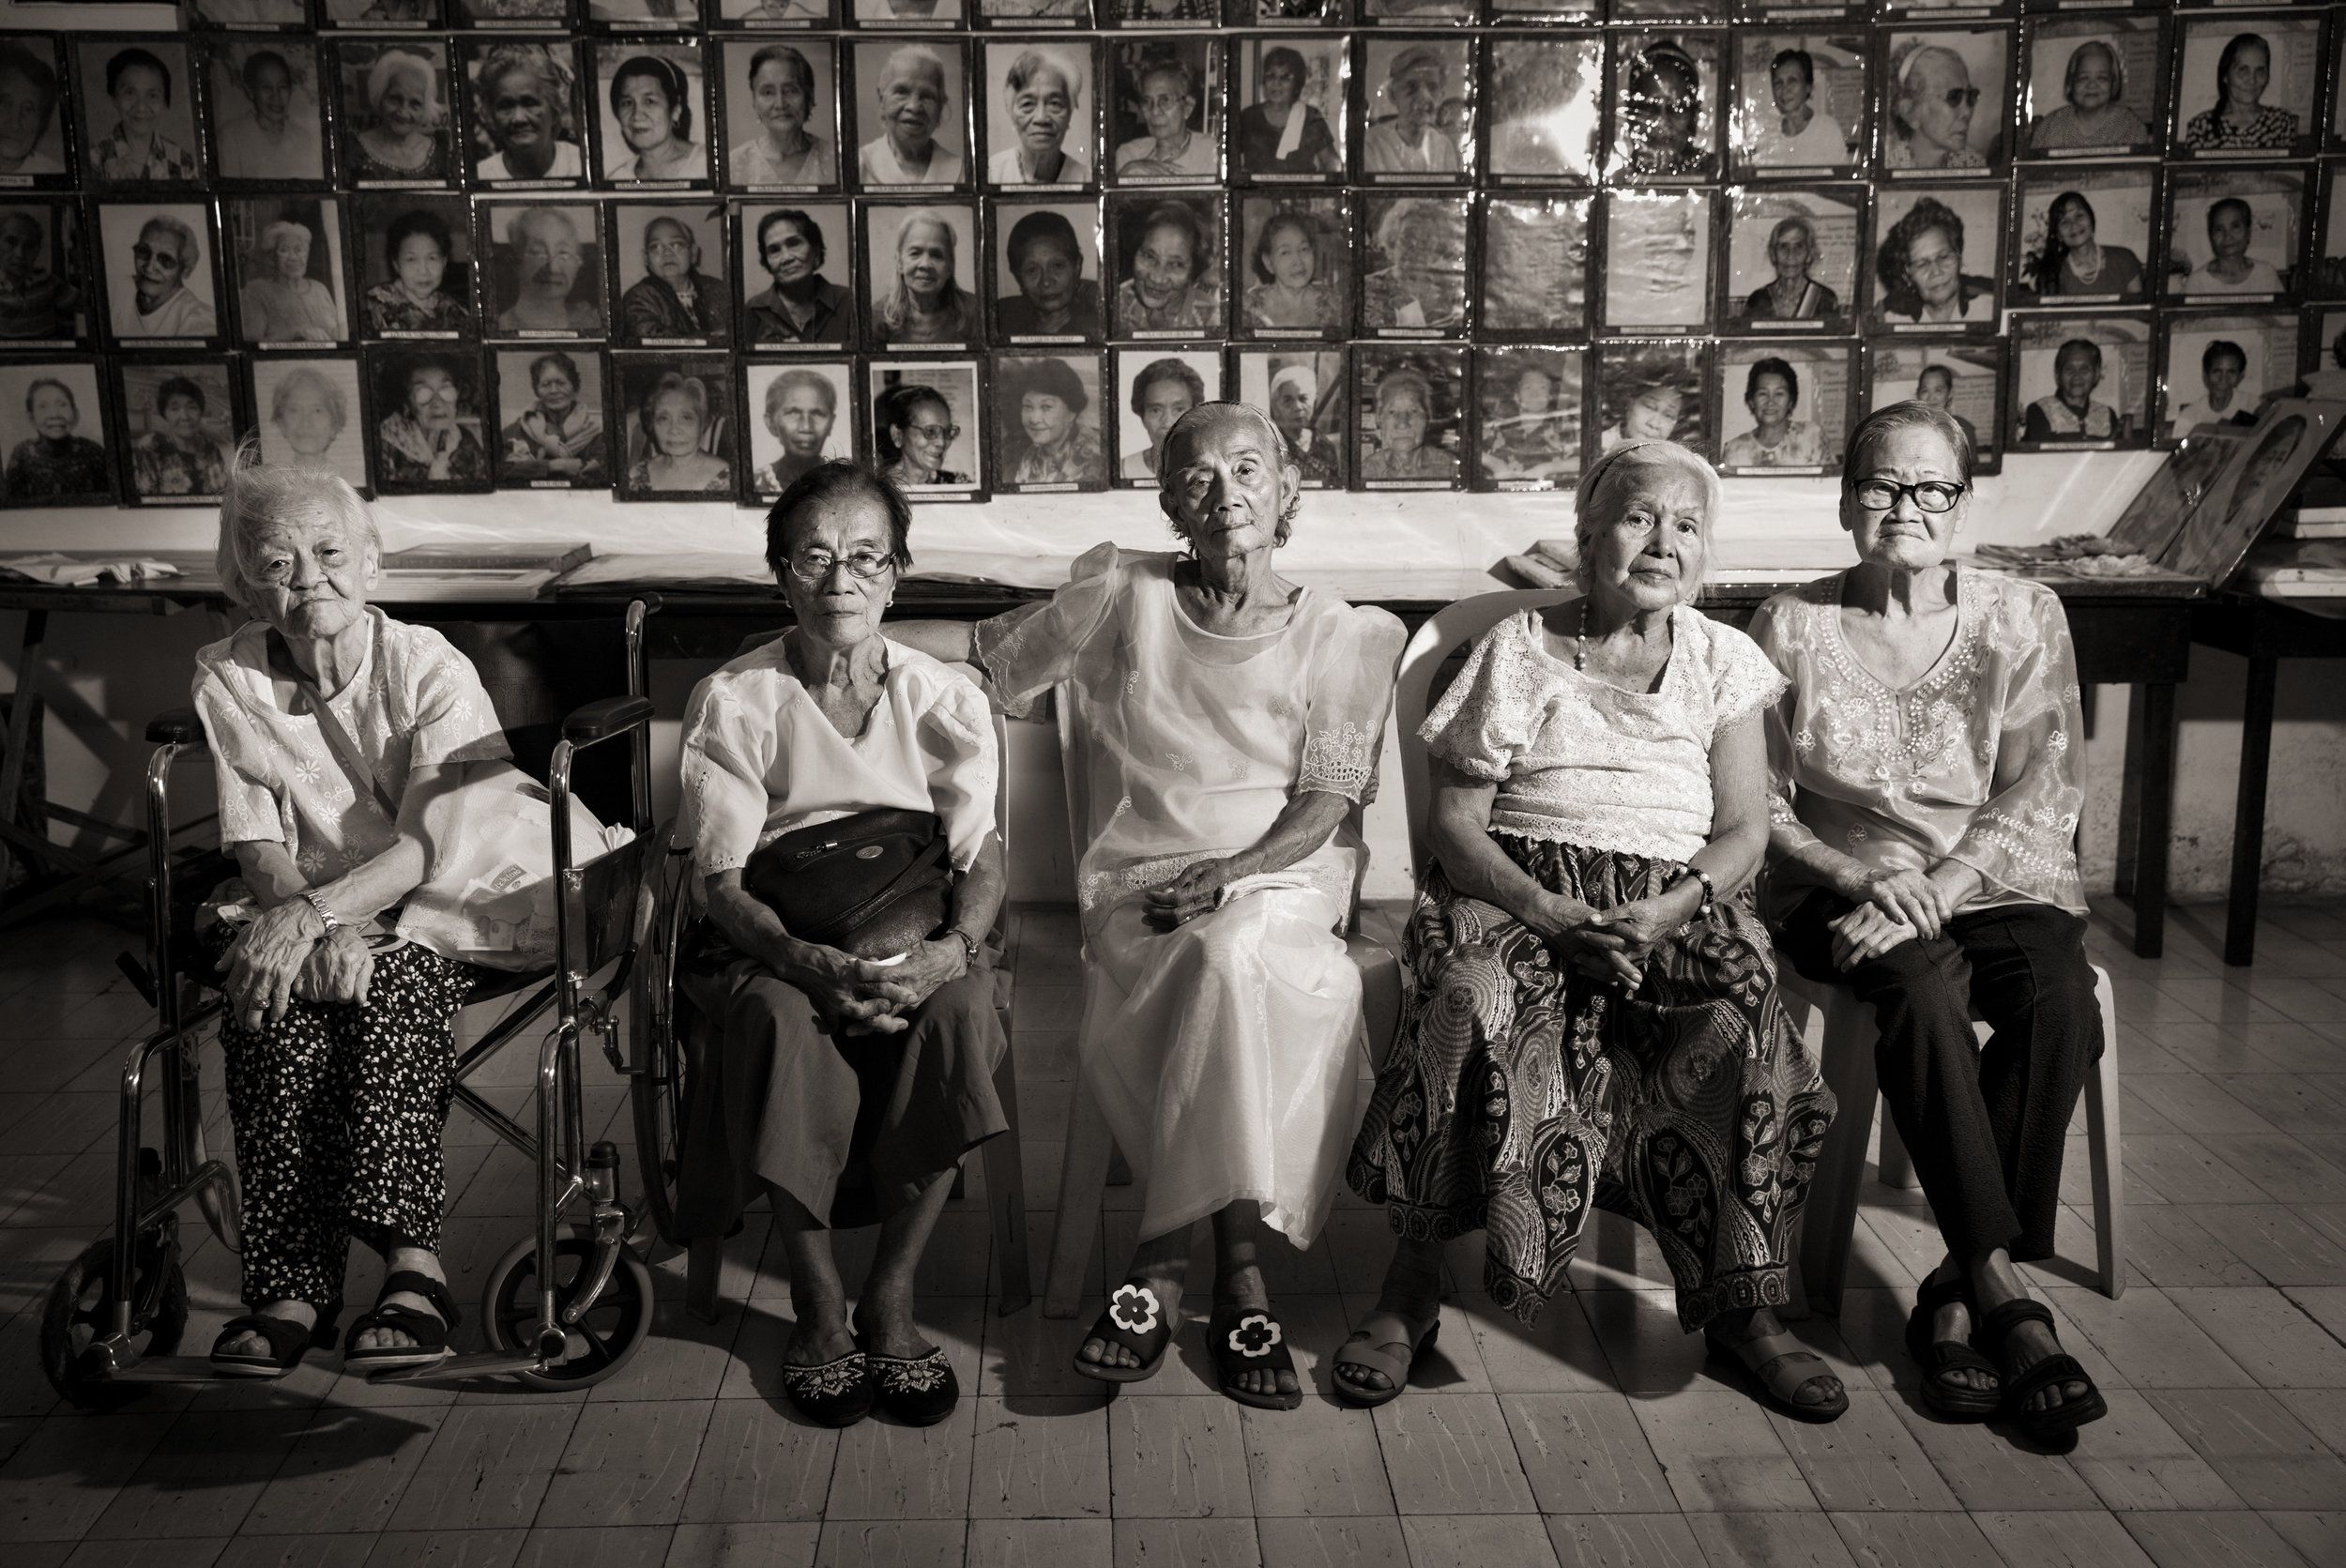 Remedios Tecson (from left), sisters Estela Adriatico and Narcisa Claveria, Felicidad delos Reyes and Estelita Dy were teens when they were sexually enslaved. Many of the estimated 1,000 Filipinas who served as "comfort women" died of injuries or illness. Survivors suffered from post-traumatic stress disorder. Many went on to marry but said their wartime experiences made them societal outcasts. Image by Cheryl Diaz Meyer. Philippines, 2019.